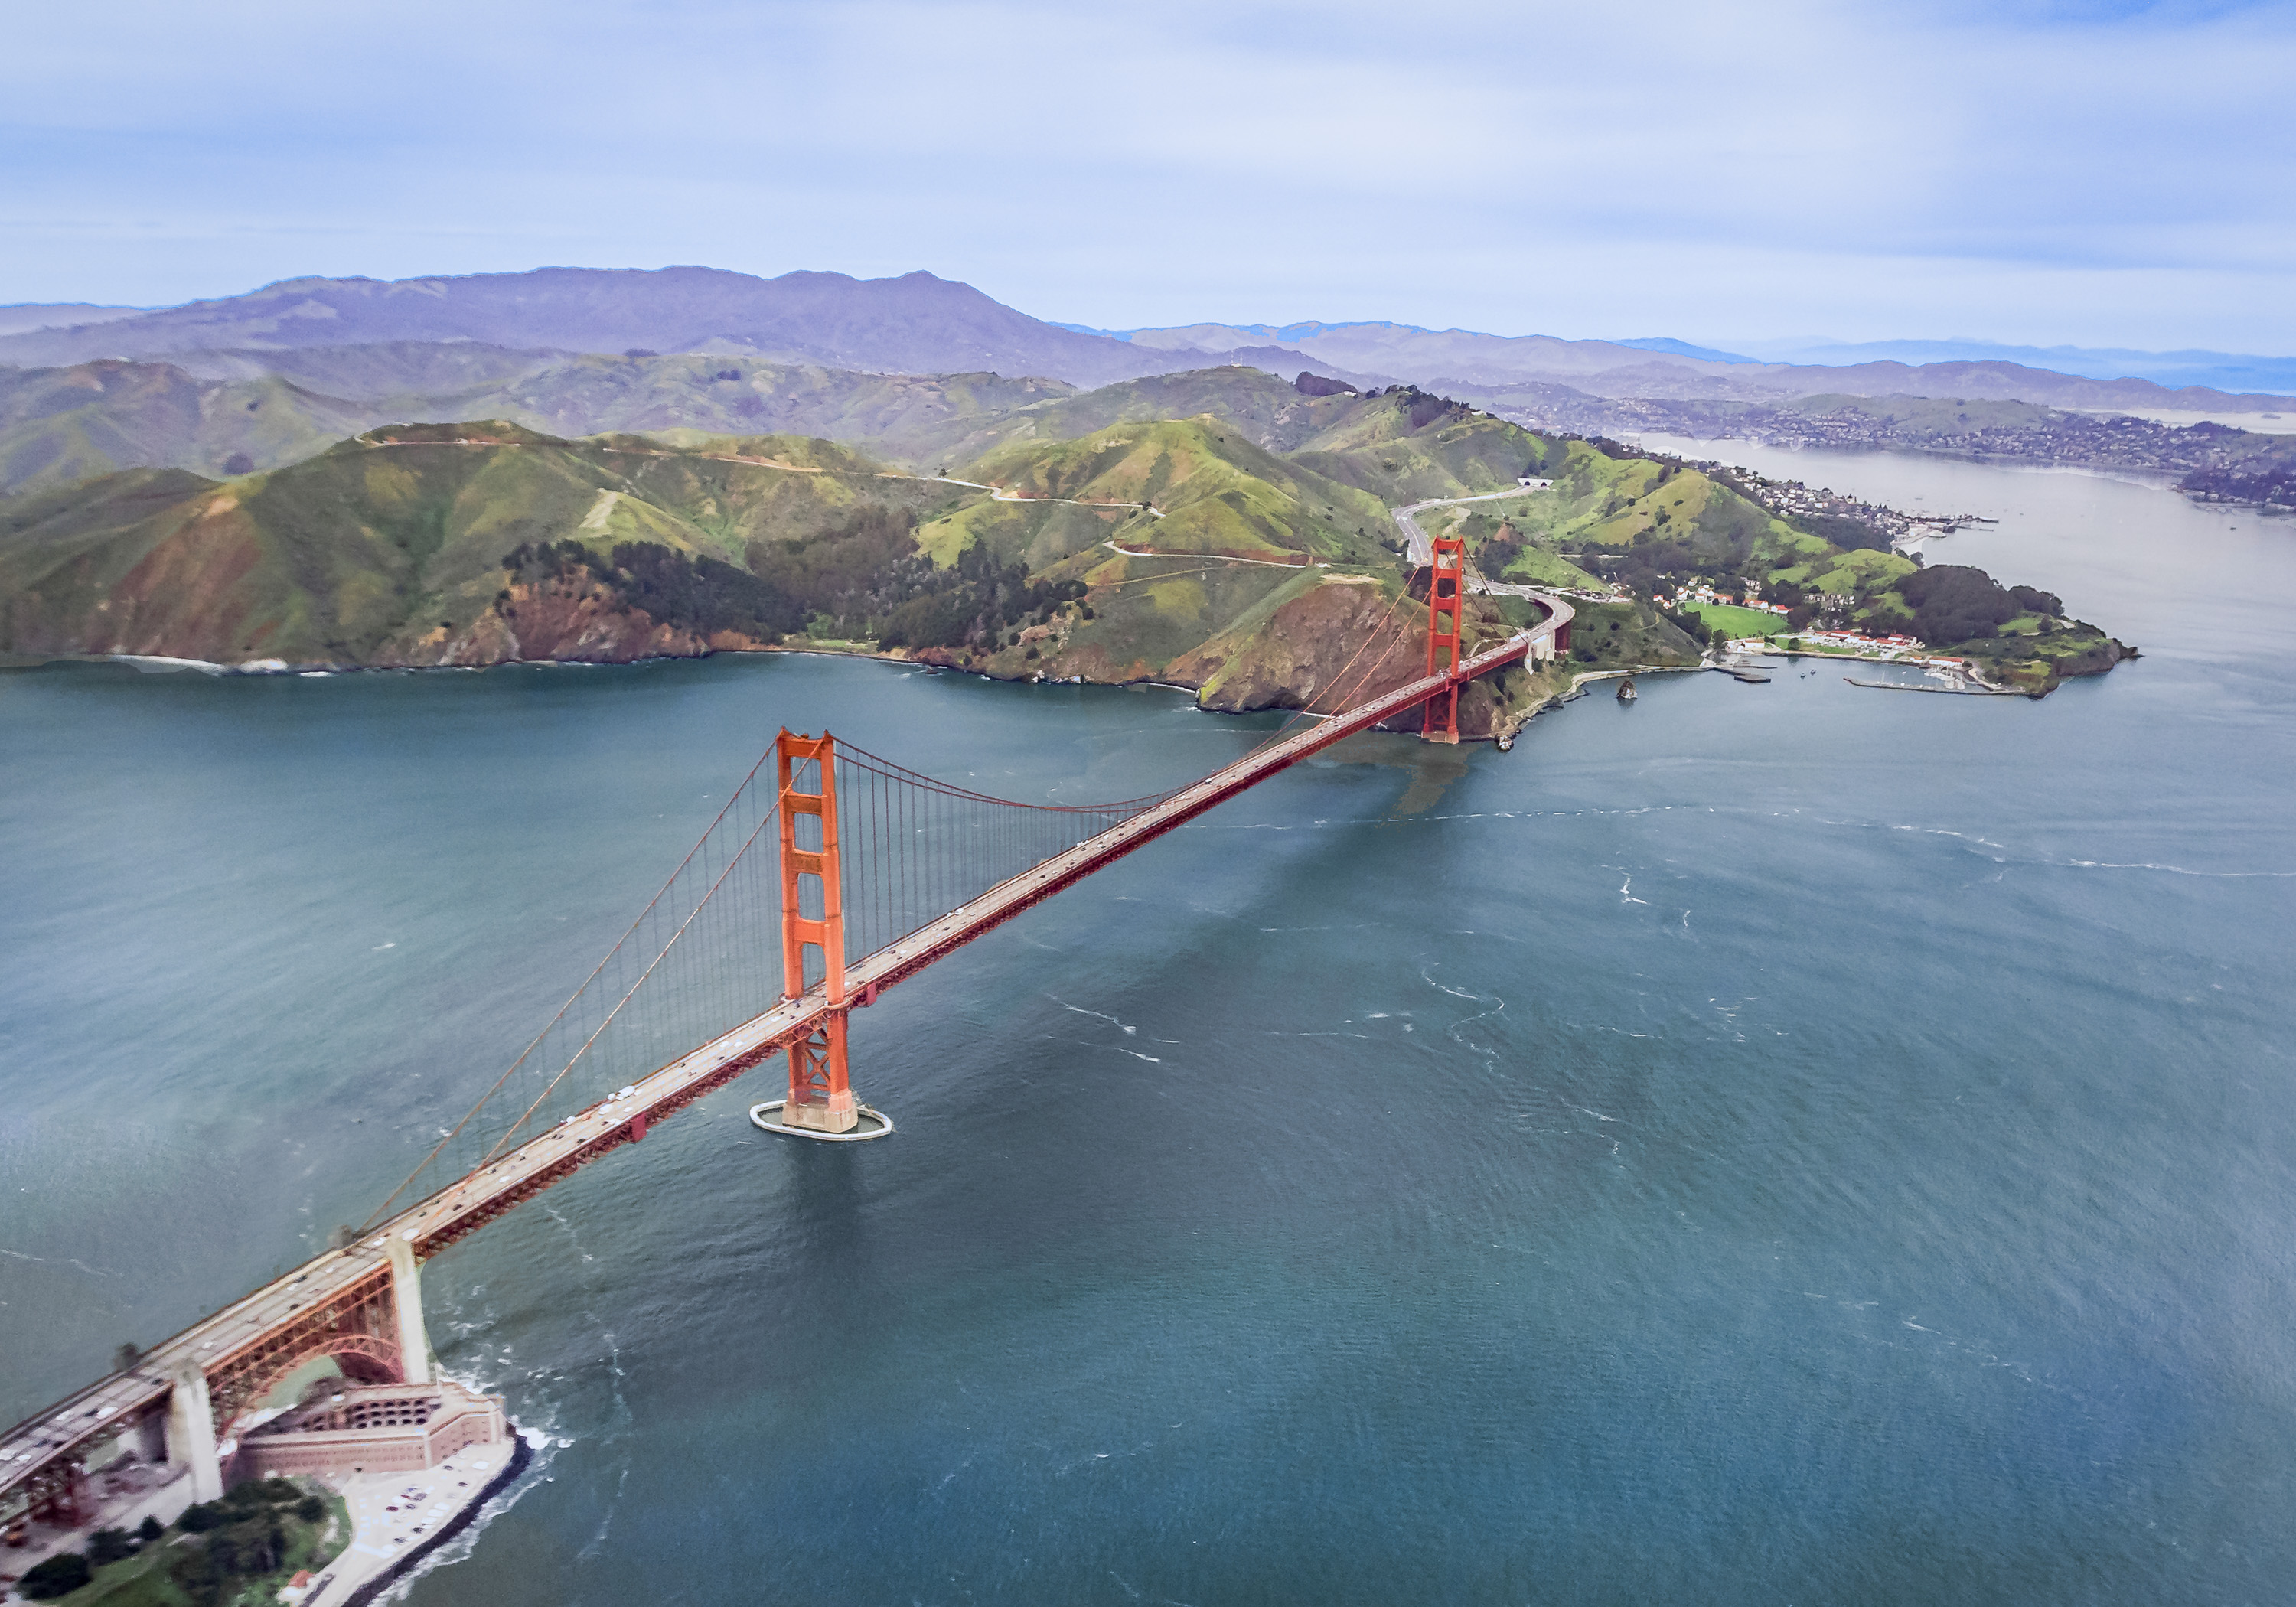 An aerial view of the Golden Gate Bridge with the San Francisco Bay surrounding it